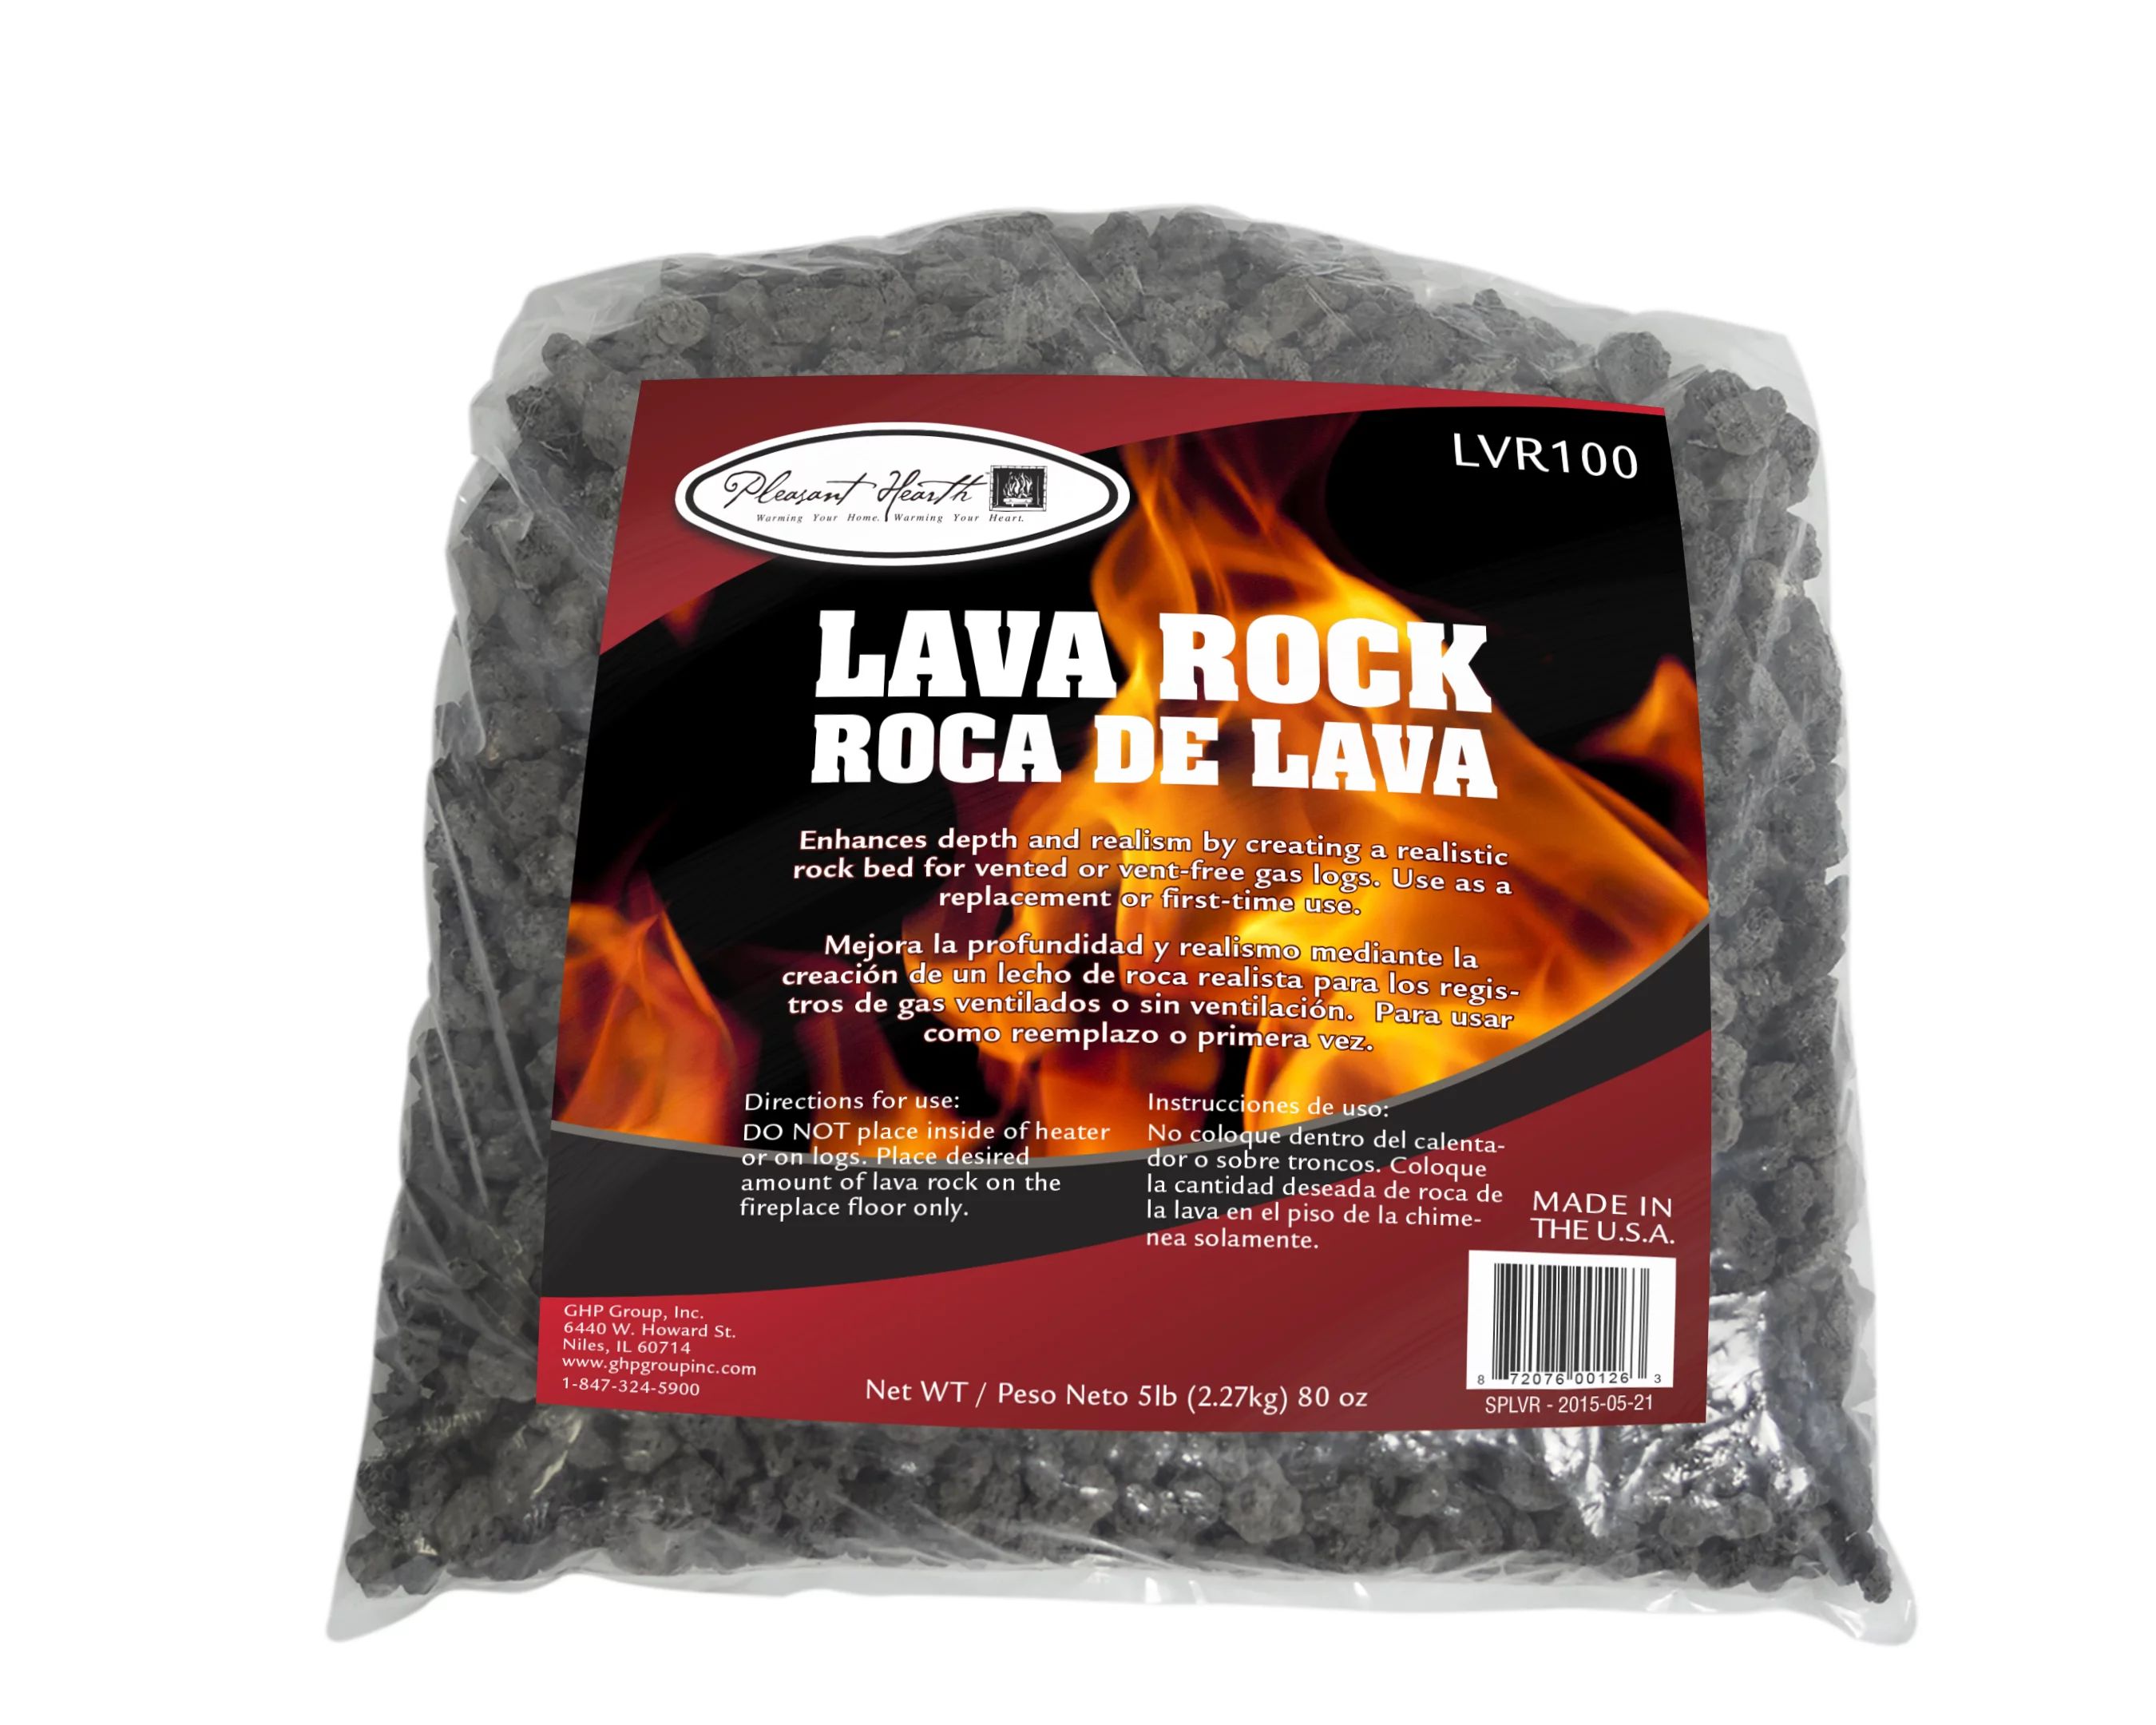 Pleasant Hearth LVR100 Lava Rock, 5 lb. for Vented and Vent-Free Log Sets | Walmart (US)